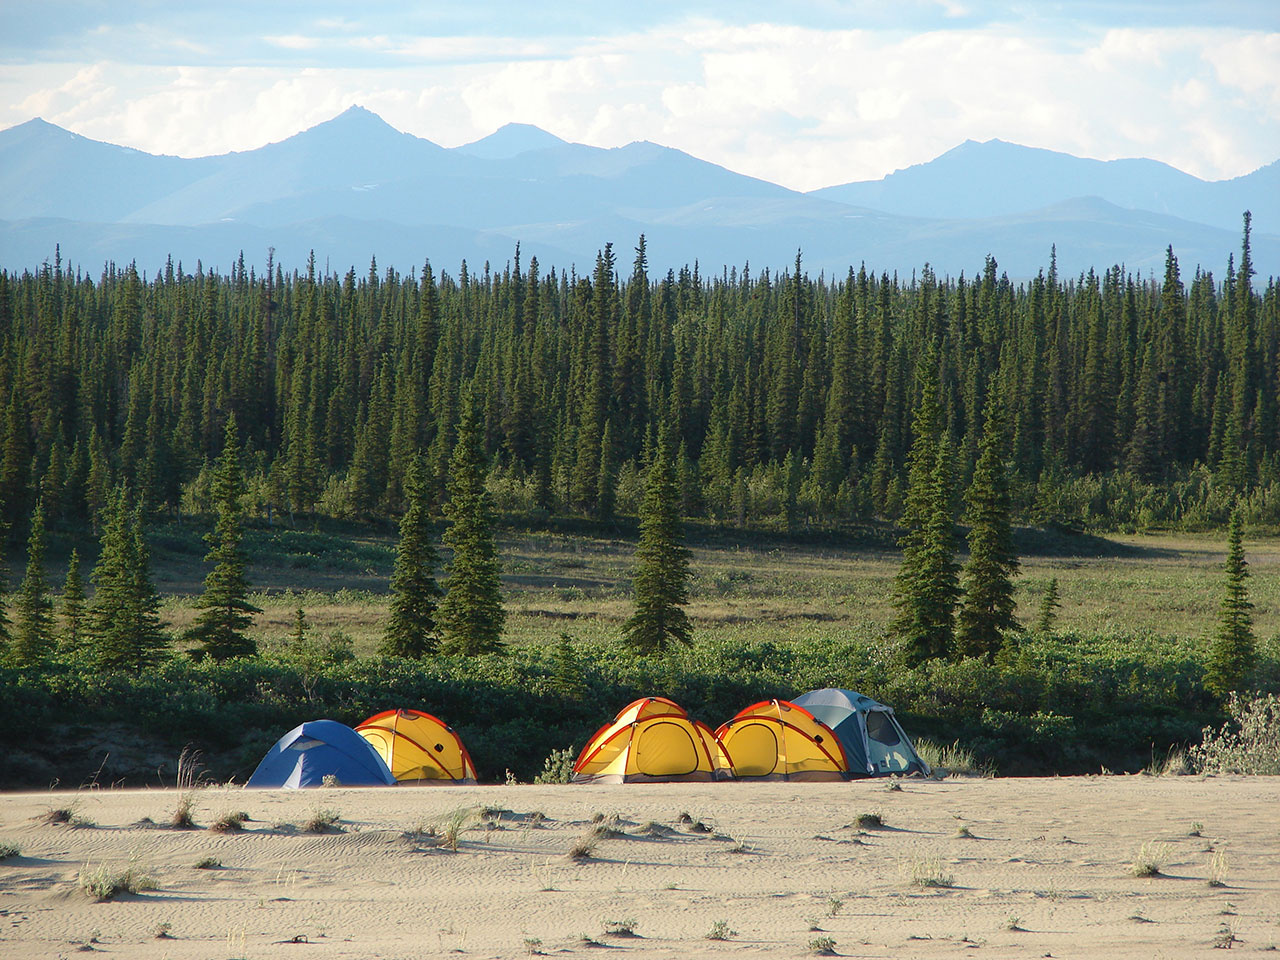 Tents camped amid trees